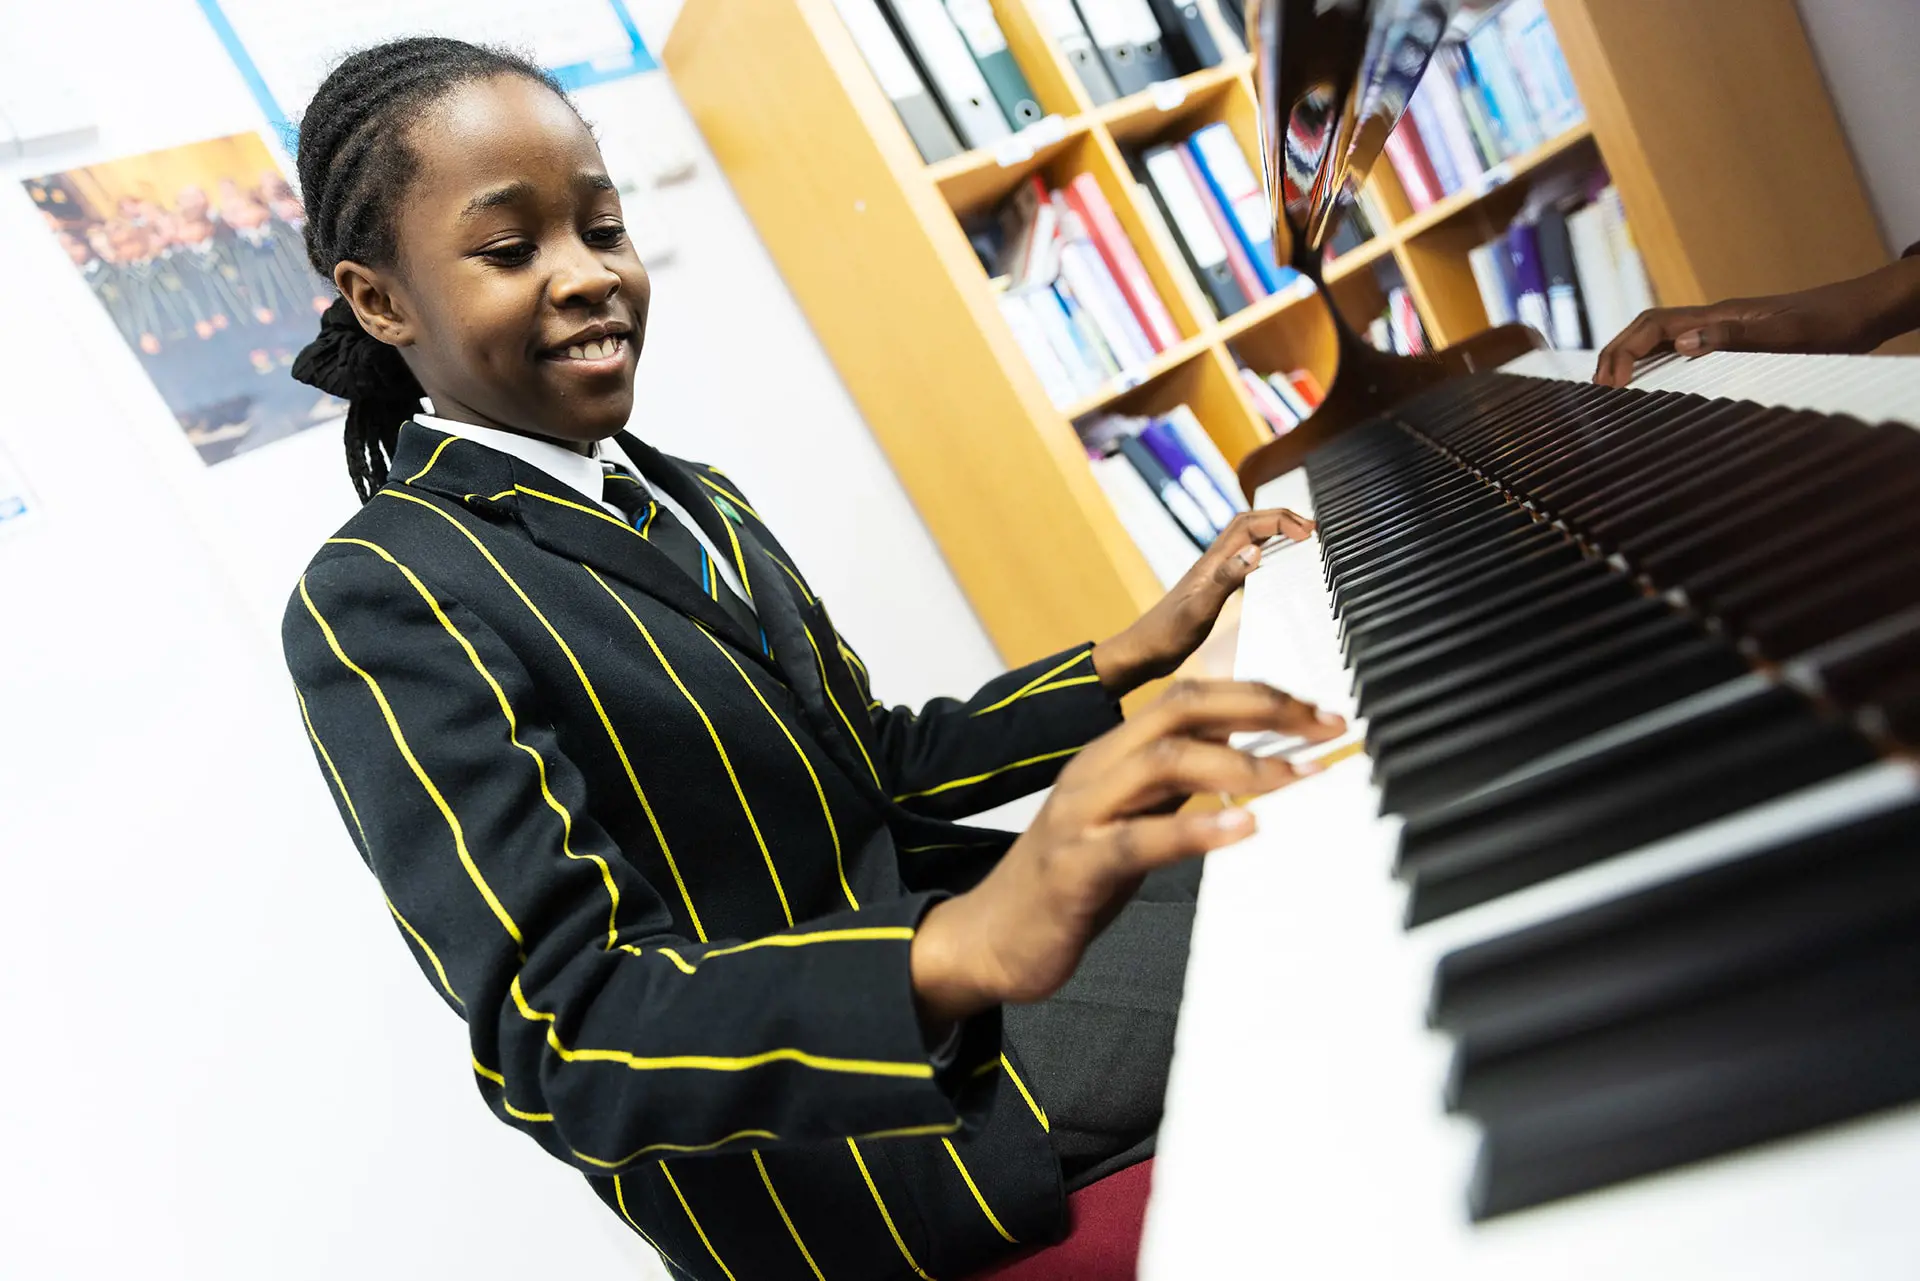 Prep School student playing piano in music lesson at The Ryleys School, a private school in Cheshire